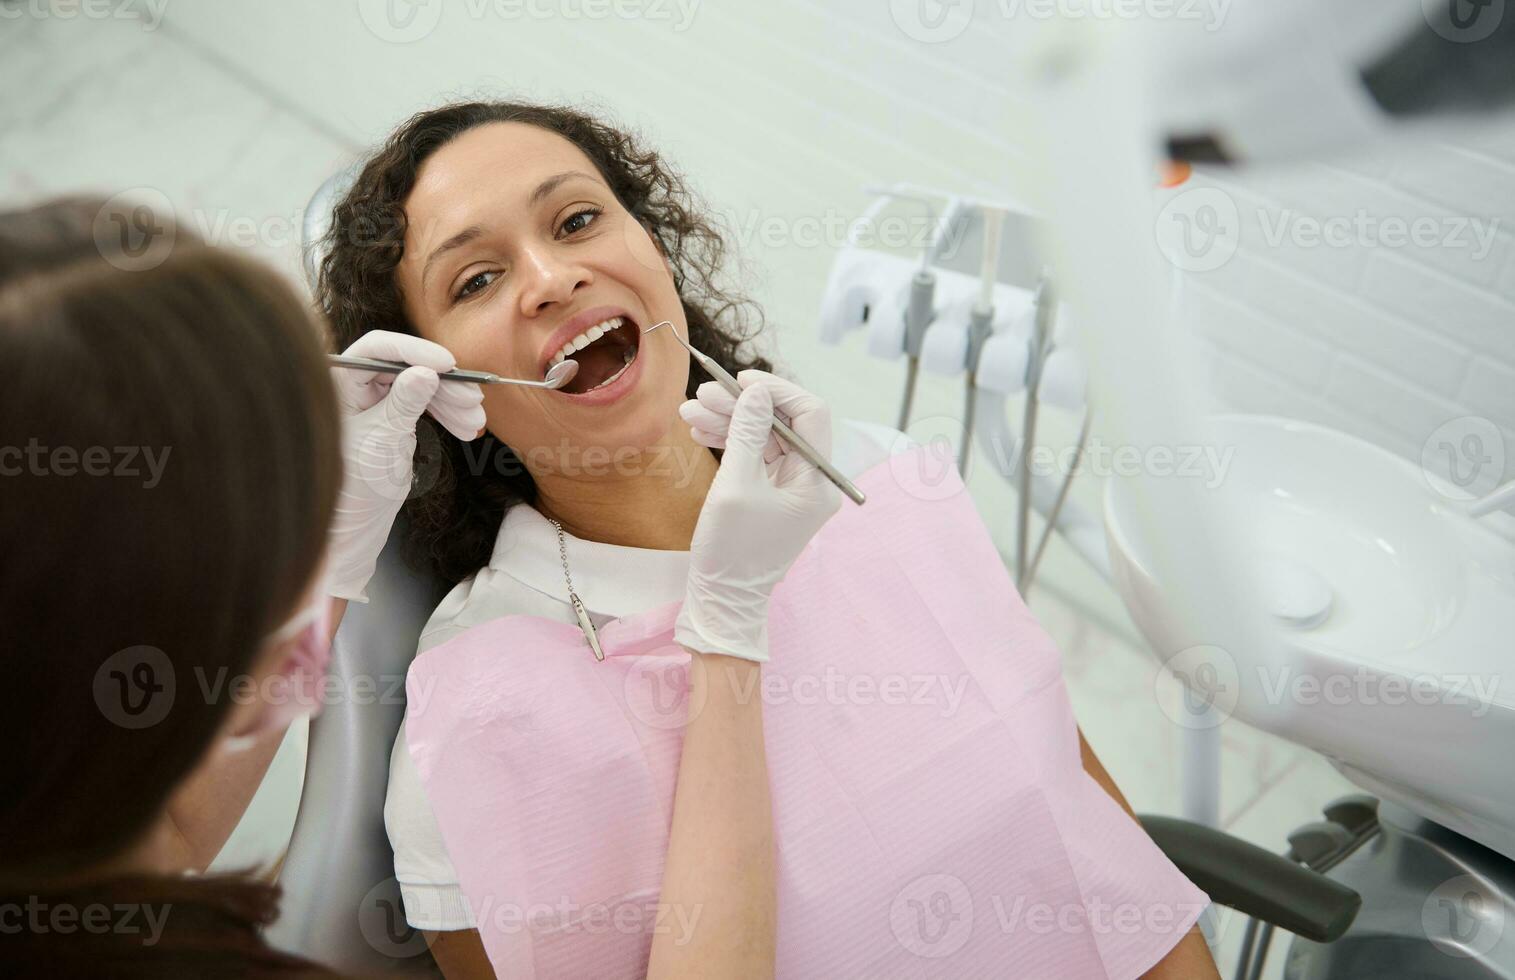 Attractive young woman with beautiful smile sits in the dentist's chair with her mouth open while the hygienist examines or treats her teeth using stainless steel dental instruments - mirror and probe photo